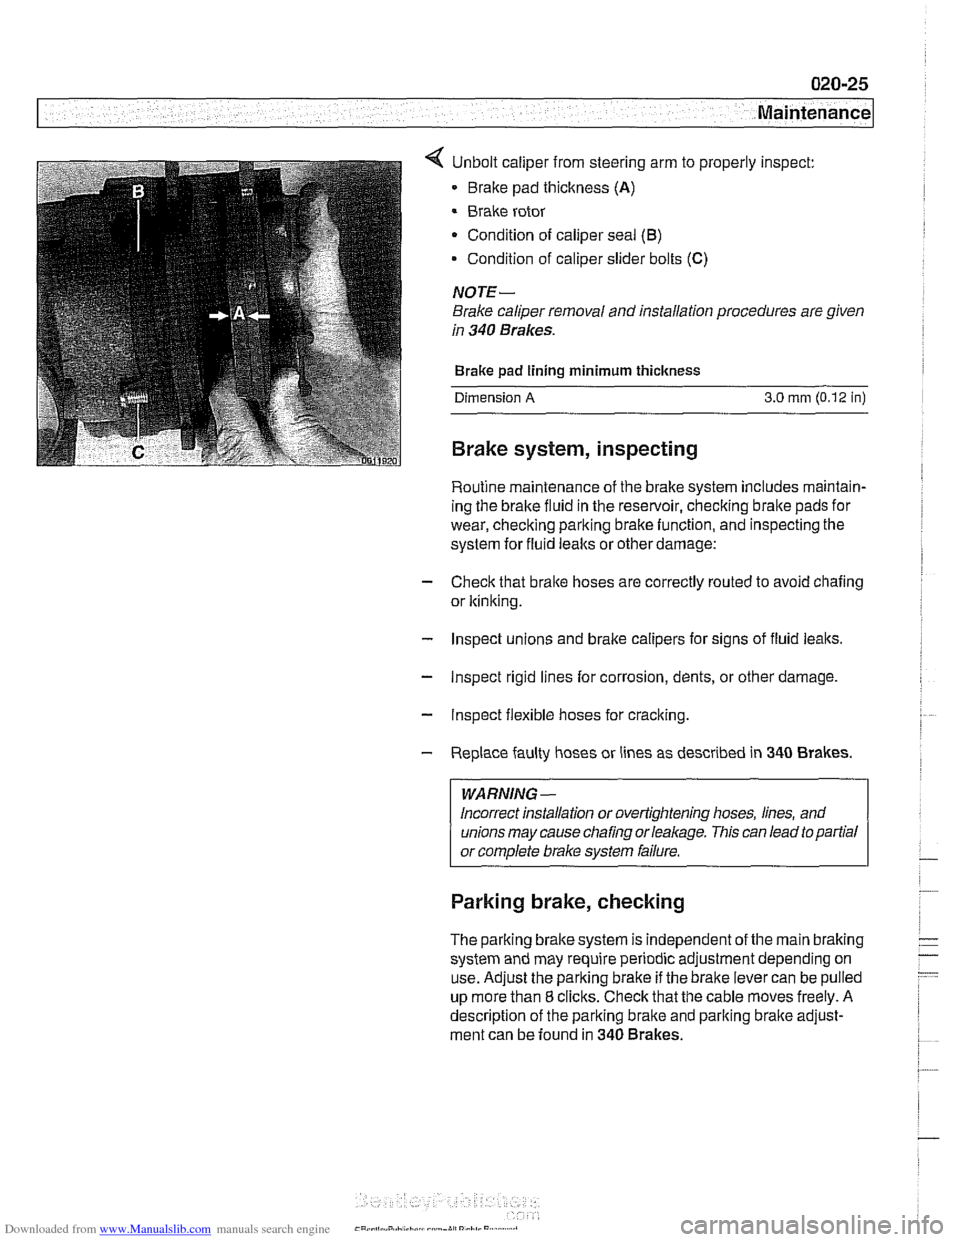 BMW 528i 2000 E39 Workshop Manual Downloaded from www.Manualslib.com manuals search engine 
7 Maintenance 
< Unbolt caliper from steering arm  to properly  inspect: 
Brake  pad thickness 
(A) 
Brake rotor 
Condition  of caliper seal 
